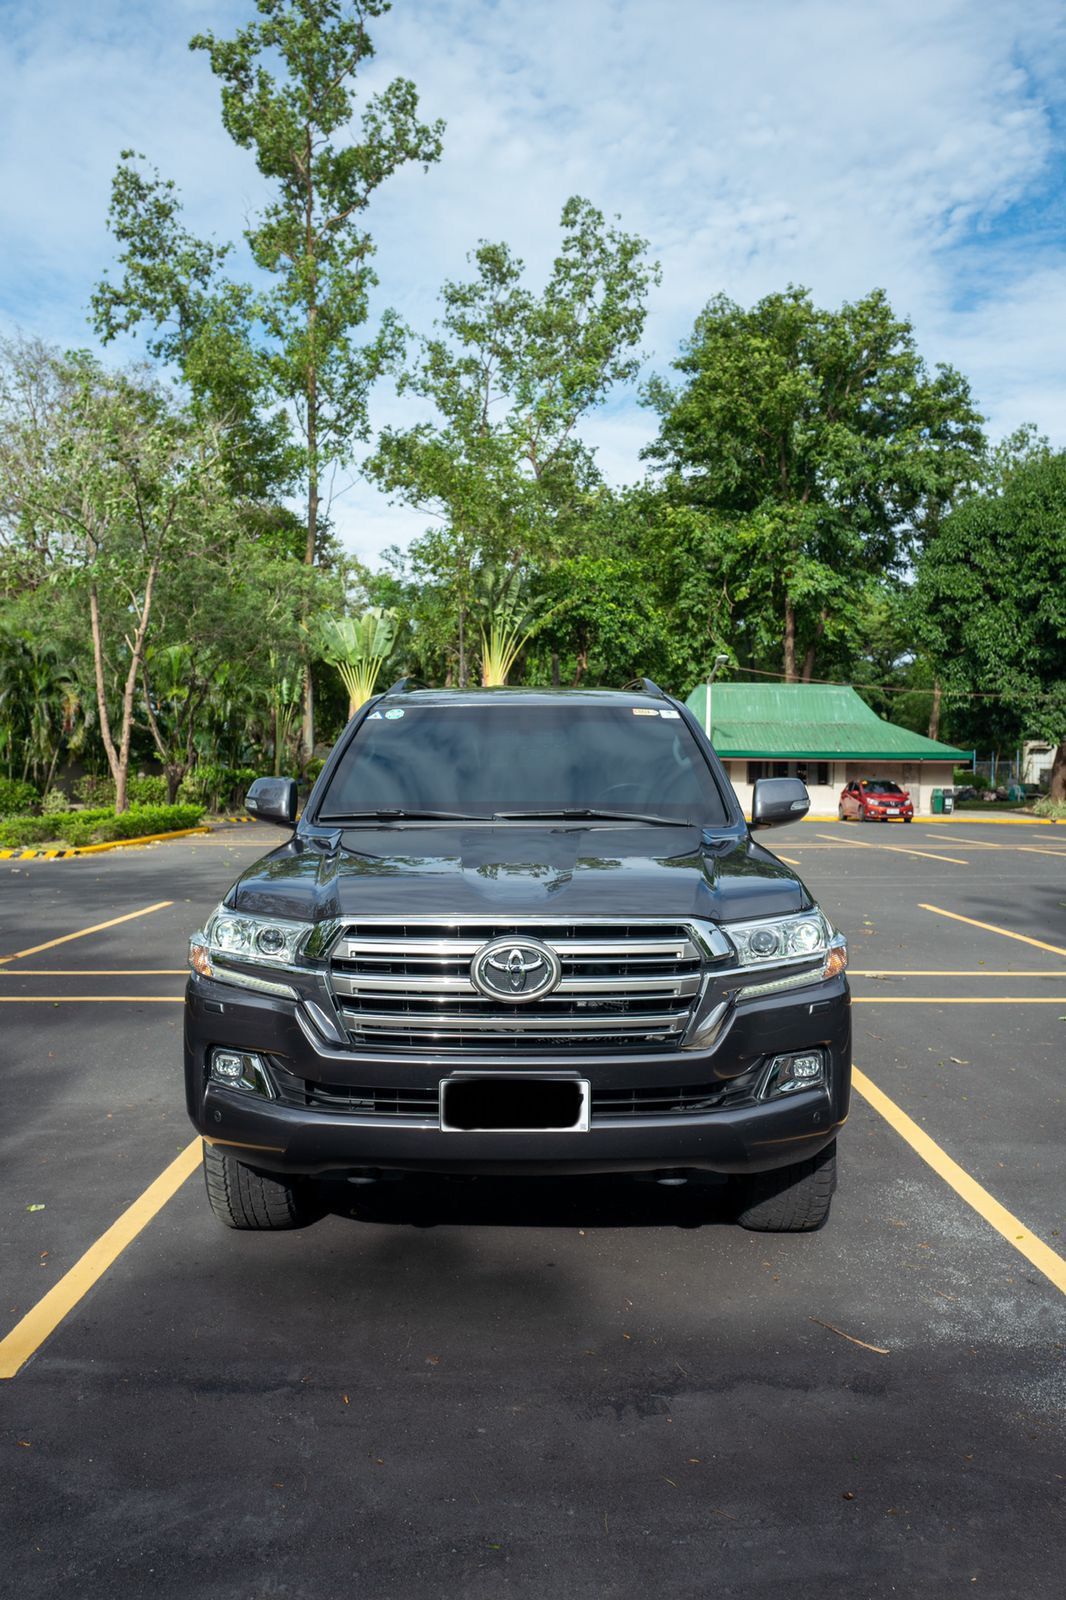 Used 2018 Toyota Land Cruiser 200 4.5L Standard AT